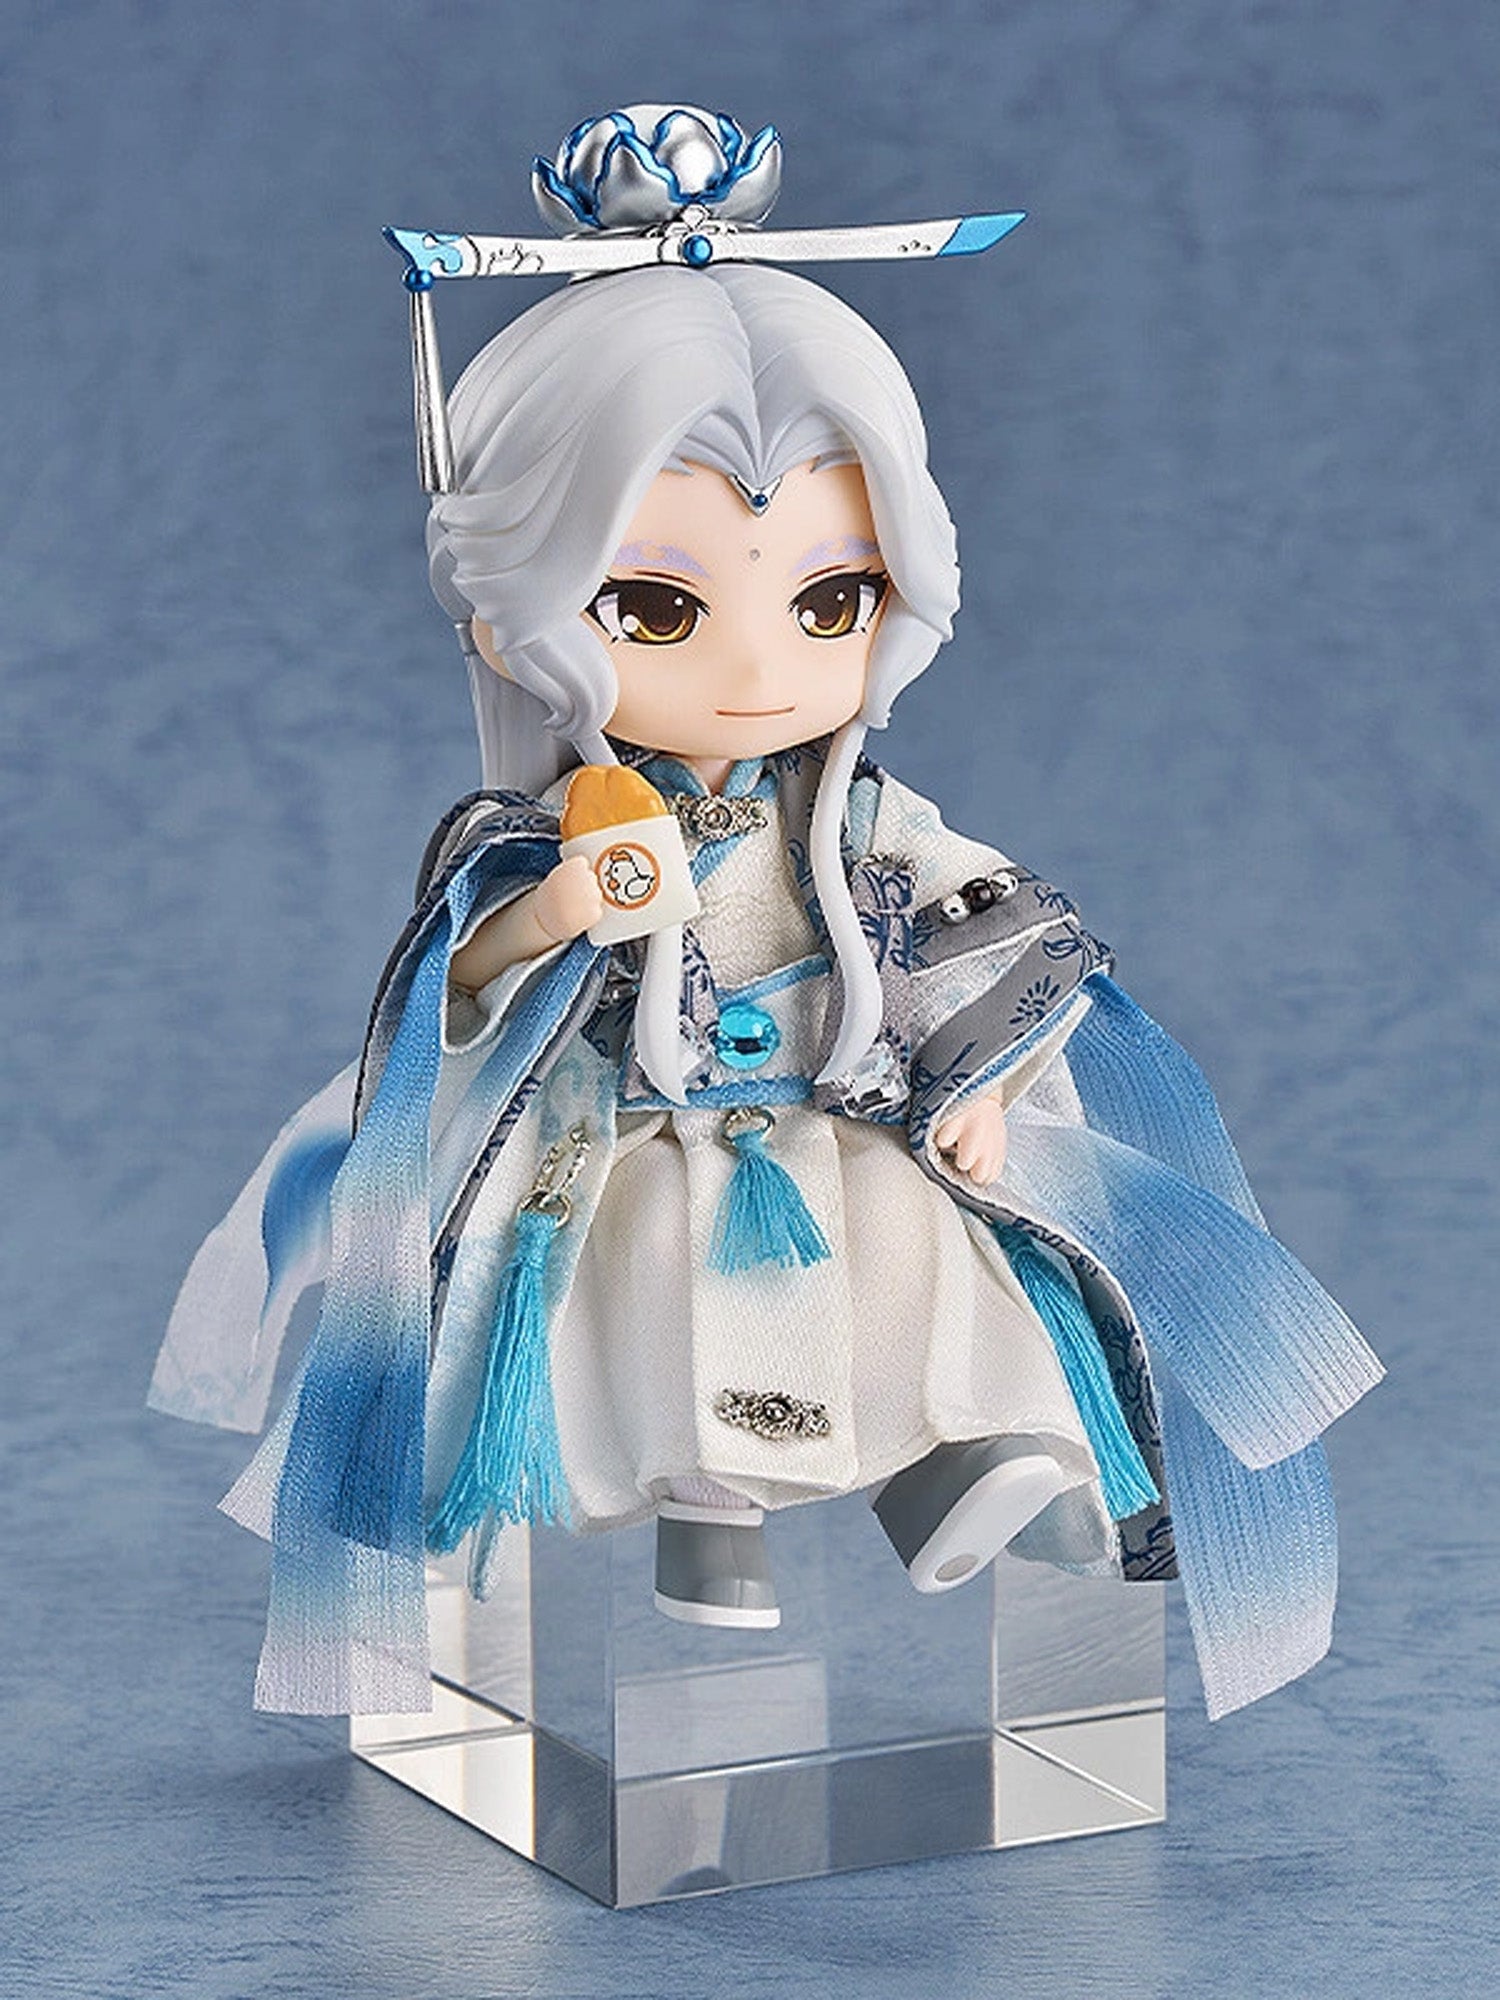 Nendoroid Doll - Pili Xia Ying 霹靂俠影 - Su Huan-Jen (Contest of the Endless Battle Ver.) - Marvelous Toys